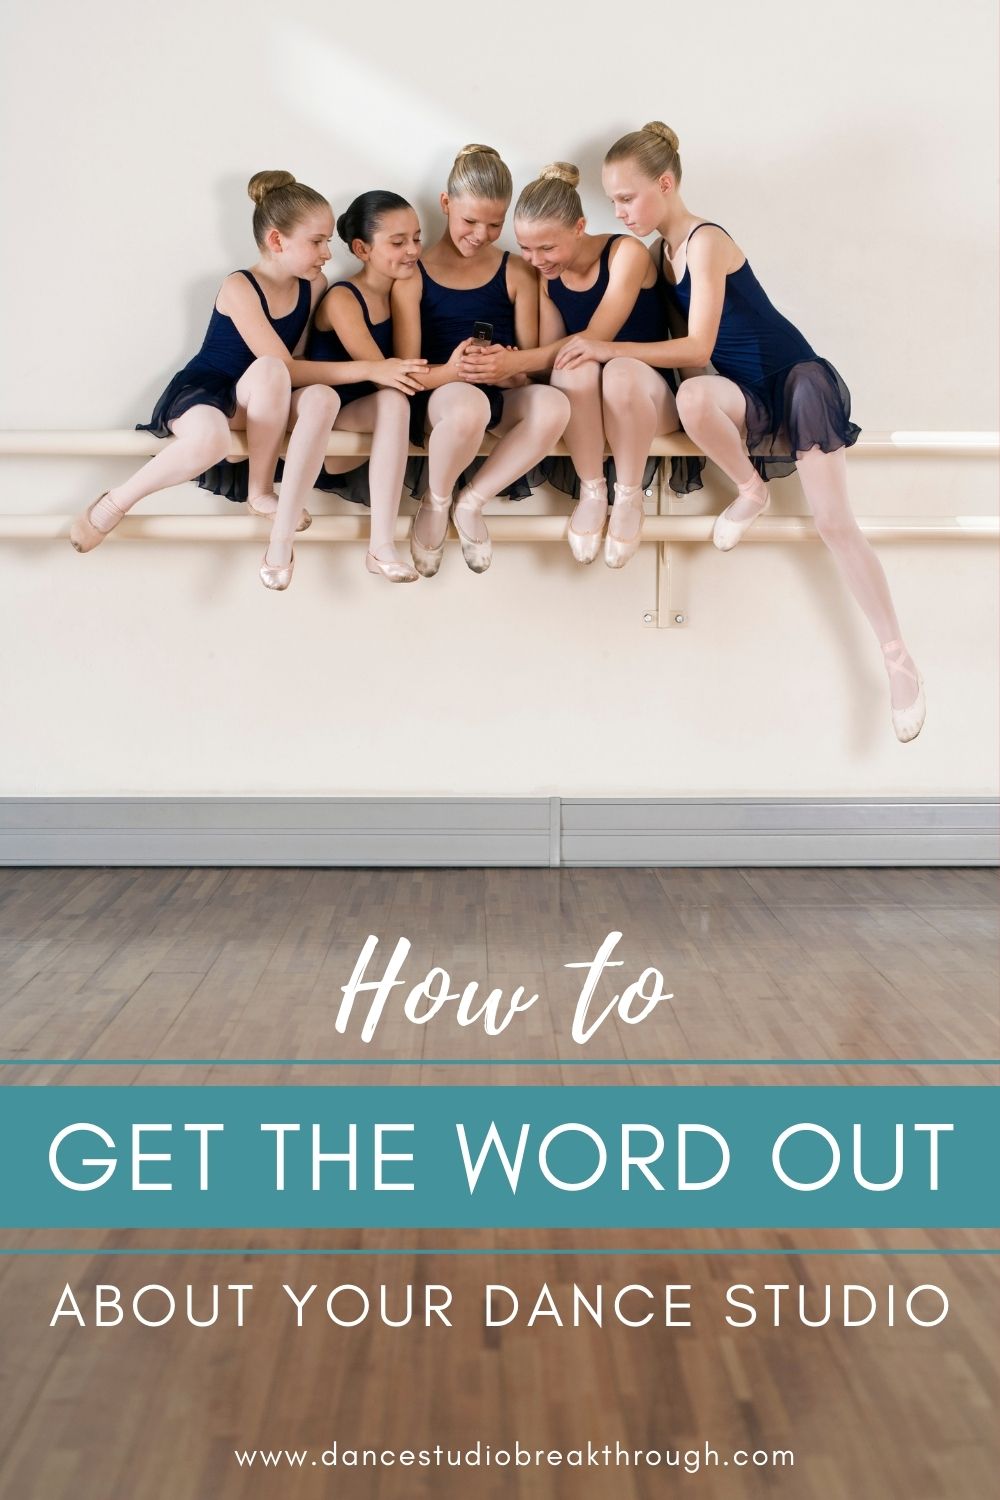 Tips on creating a successful referral program for your dance studio